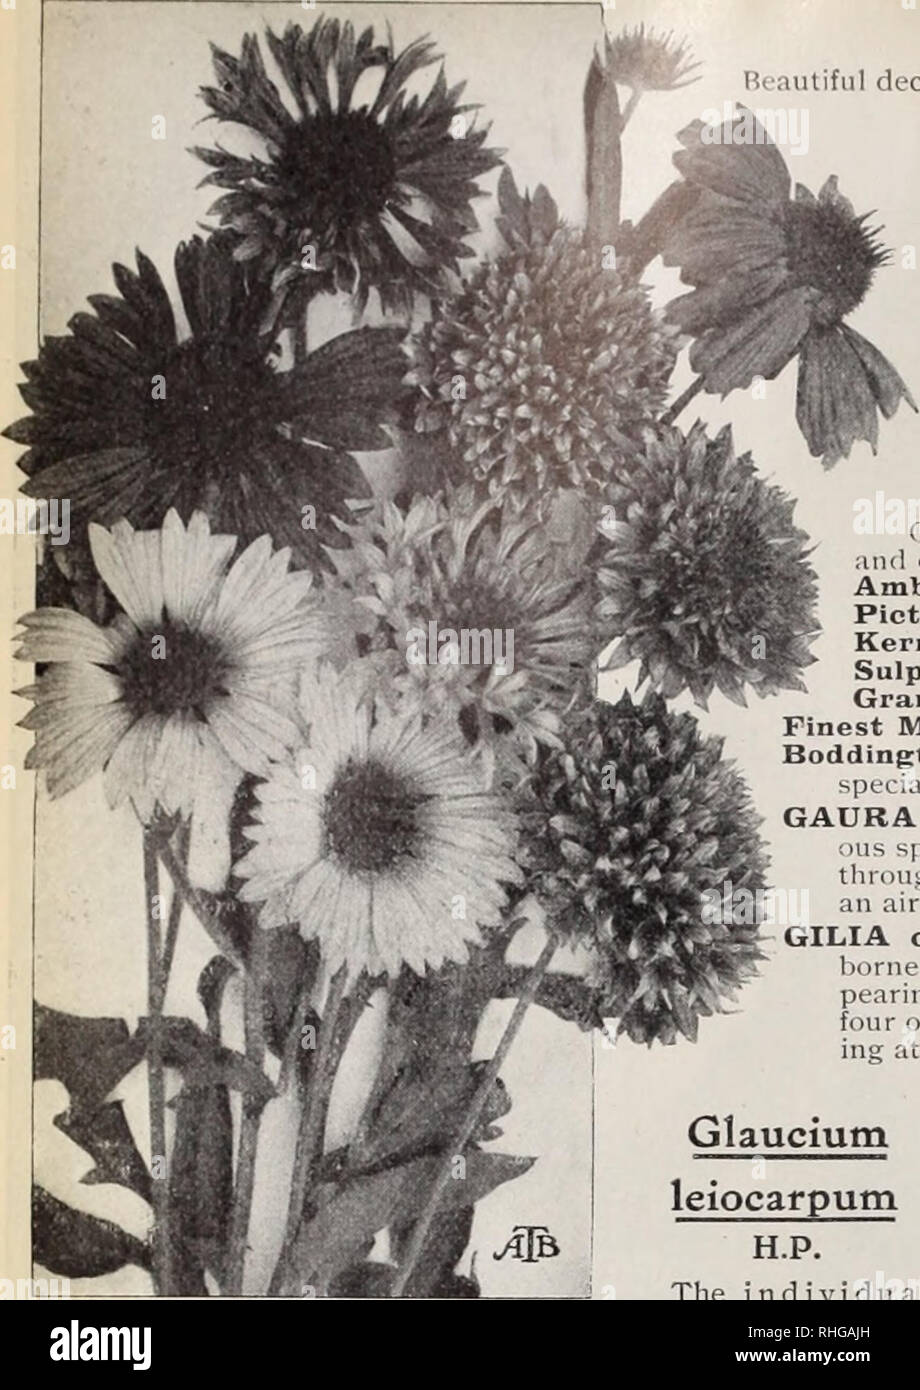 . Boddington's quality bulbs, seeds and plants / Arthur T. Boddington.. Nursery Catalogue. 26 Arthur T.Boddijn jton, 342 Vest 14th St.. New Vork City. Francoa ramosa (Bridal Wreath) G.P. Reautiful decorative plant, wliicli is of the easiest possible greennouse culture. During tlie summer months it produces a large number of elegant sprays of pure white Howers. Excellent for cutting. Height ft. I'kt. 25 cts. Pkt. FRANCOA glabrata. H.II.I'. The flowers are of the purest snow- white, are very freely jjiiuluced on large-branched sjukes ? pkts. for $1. .$0 35 FUNKIA (Plantain Lily). H.P. 2 ft. Sum Stock Photo